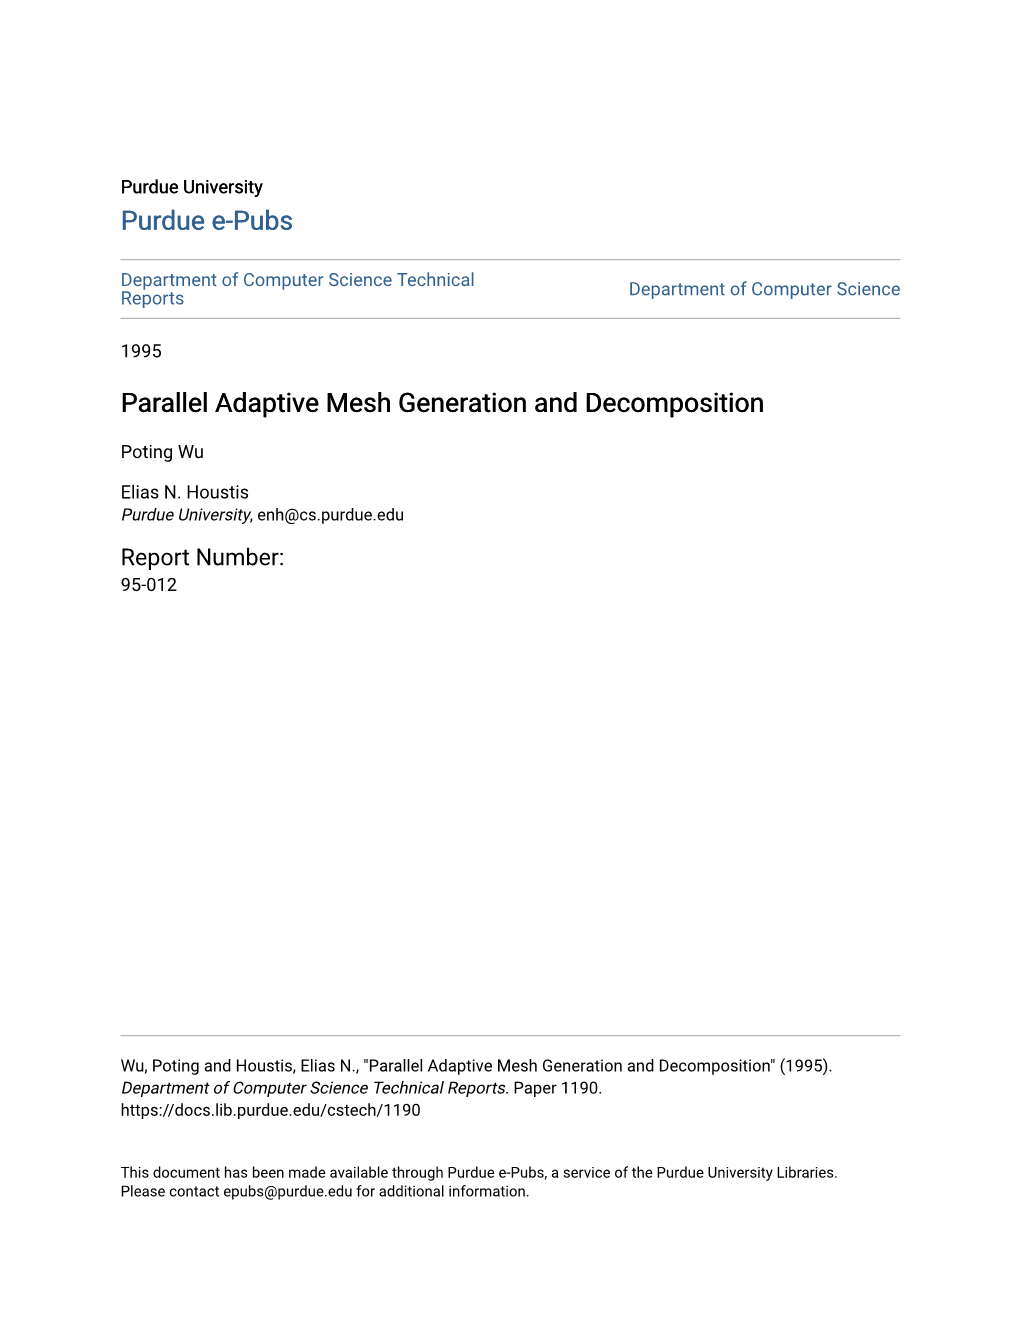 Parallel Adaptive Mesh Generation and Decomposition